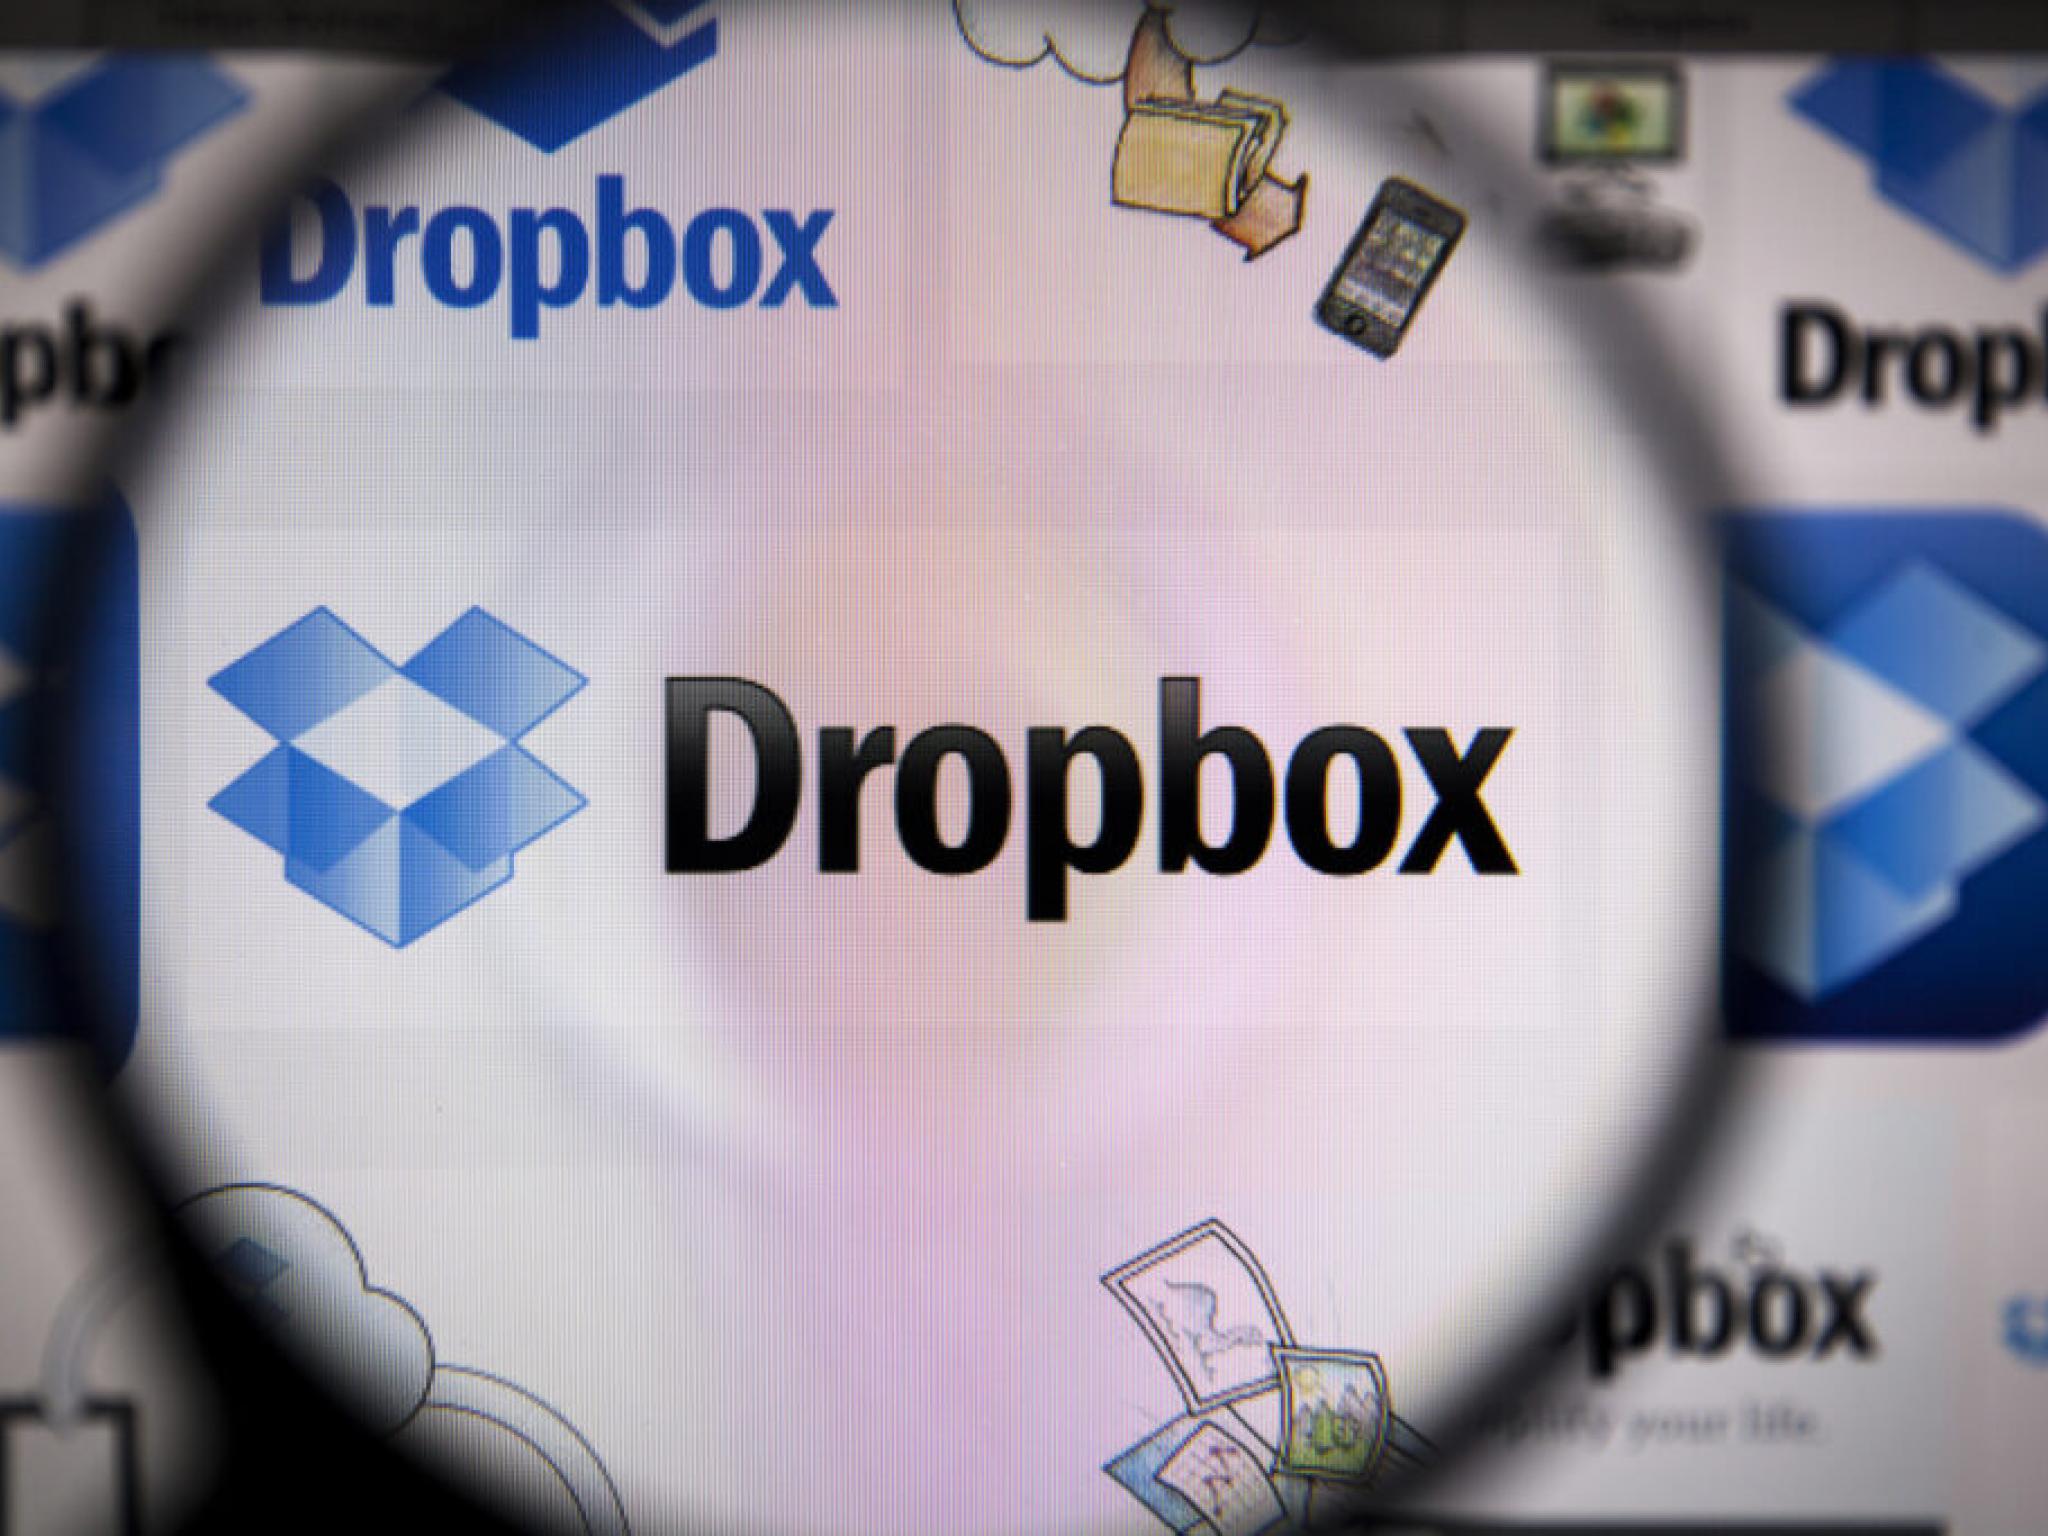  dropbox-shares-rise-on-better-than-expected-q1-results 